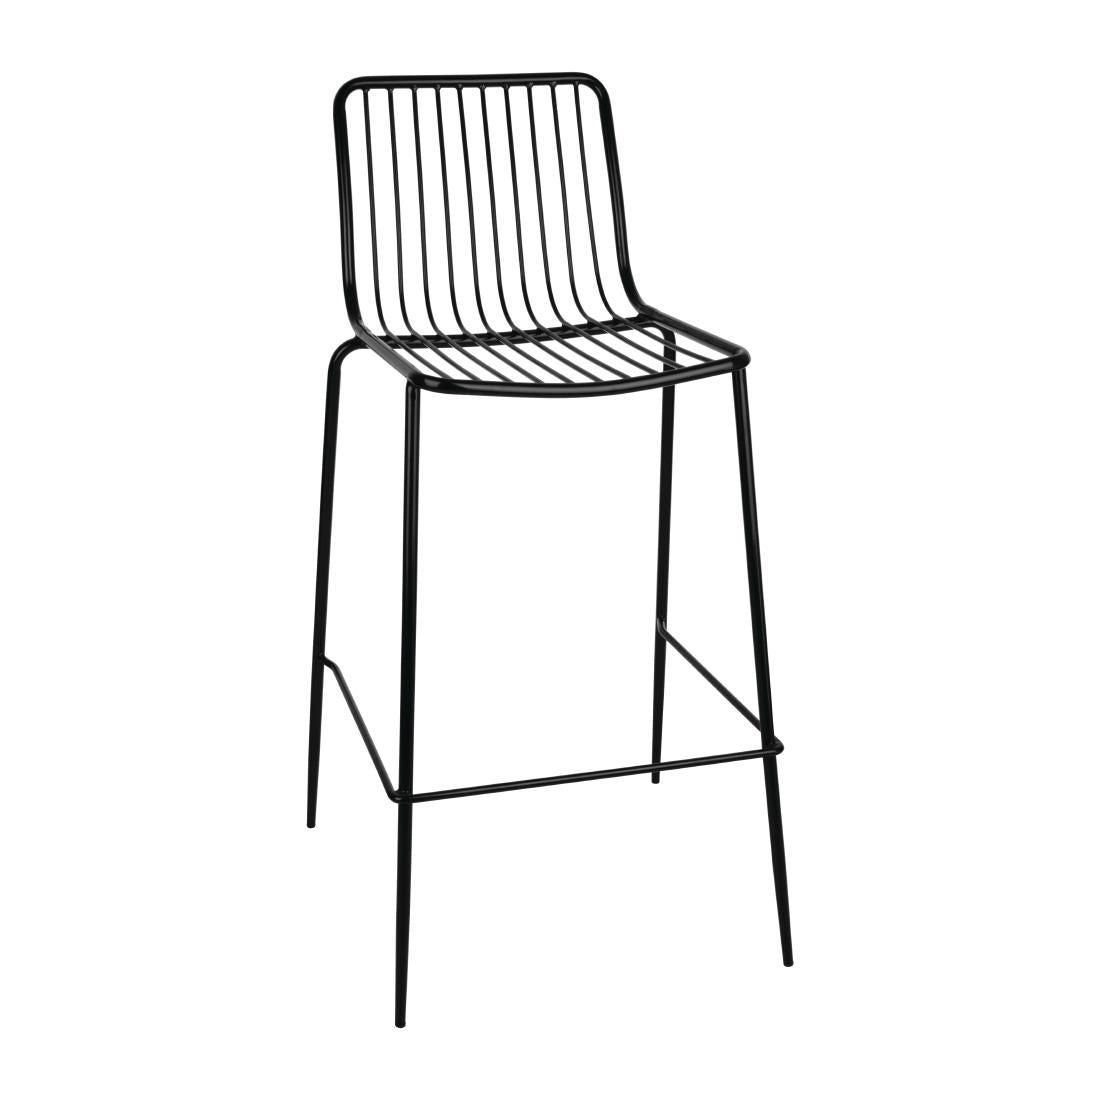 Bolero Steel Wire High Stools (Pack of 4) JD Catering Equipment Solutions Ltd